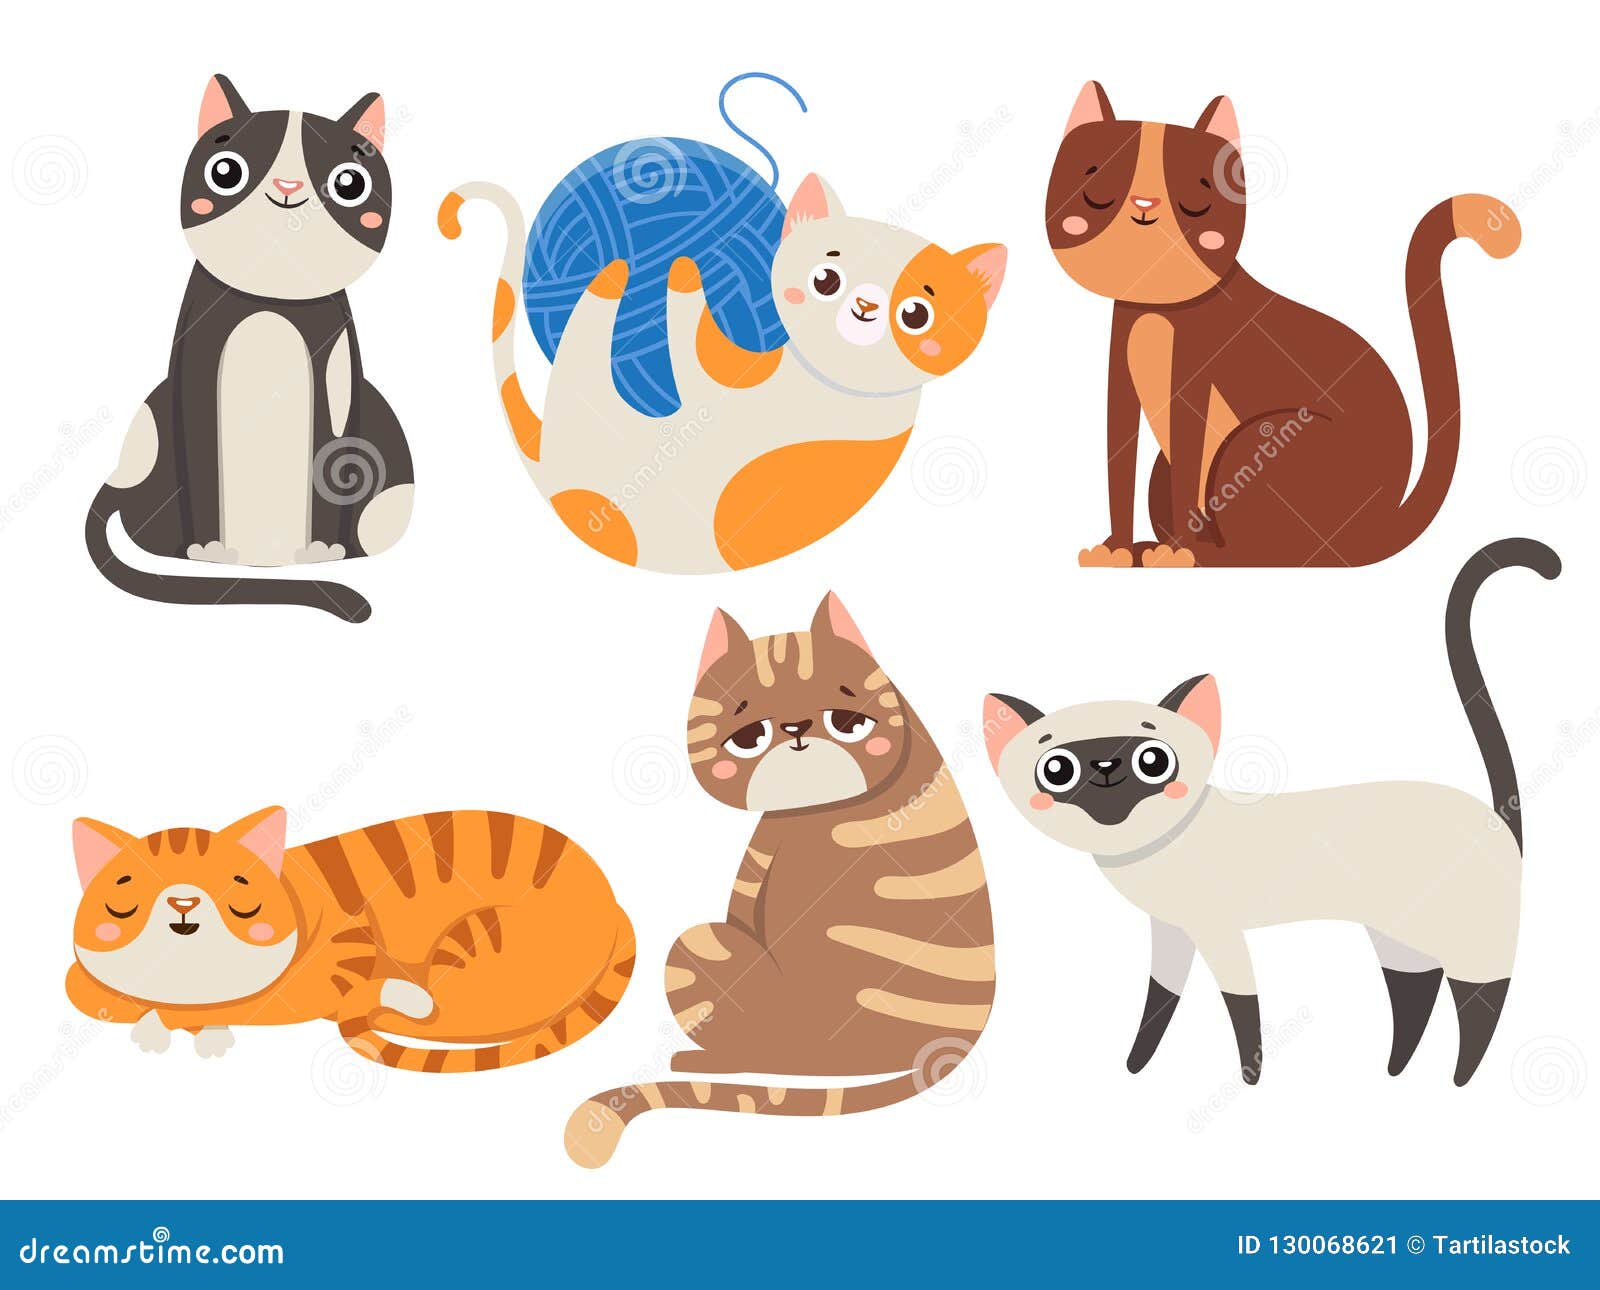 Cute Cats Pets or Kittens Playing or Posing Vector Flat Icons